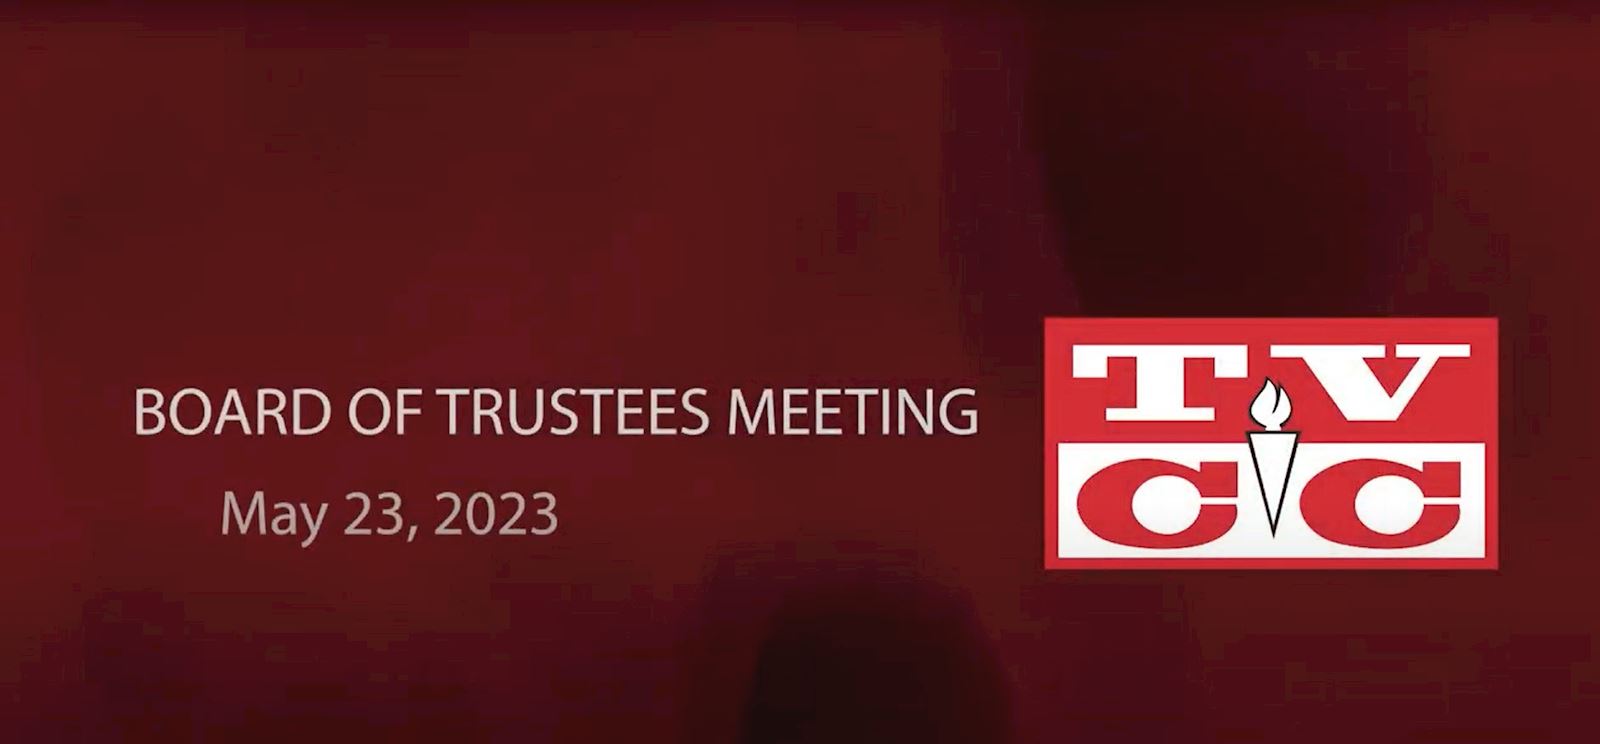 Board of Trustees Special Meeting, Tuesday,  May 23, 2023                                                                                   